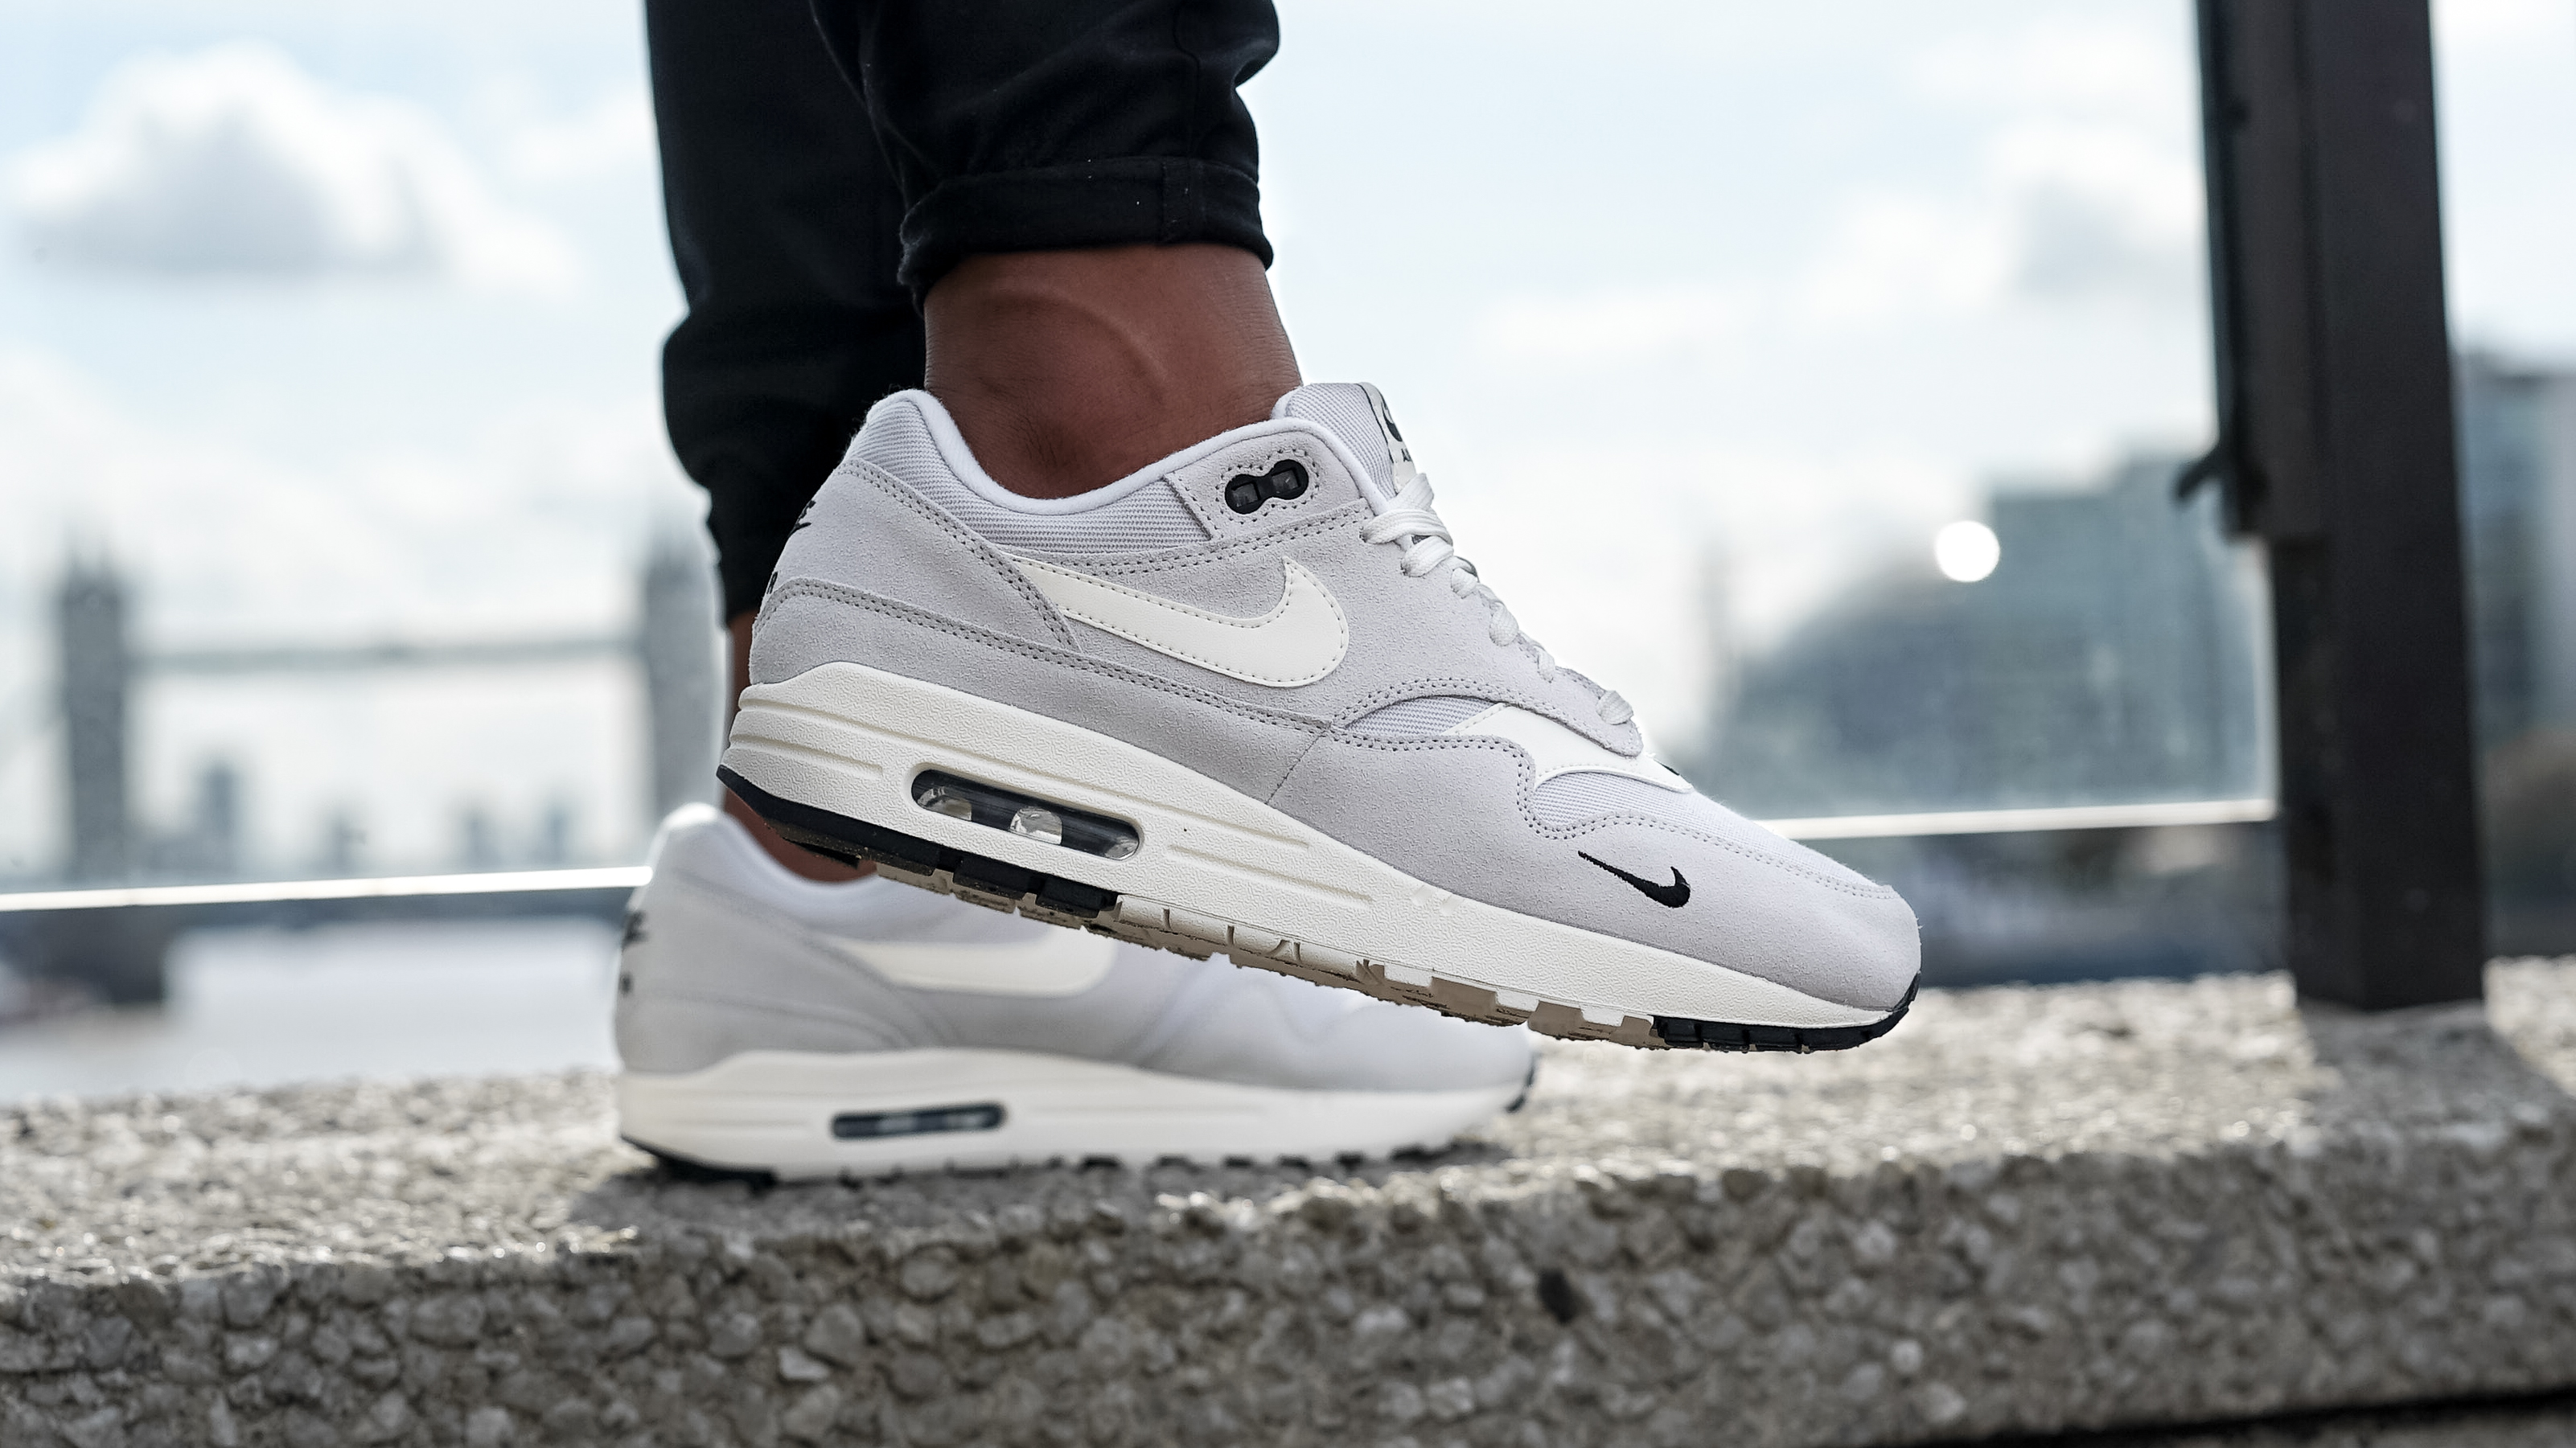 Nike Upgrade The Air Max 1 With A Premium Iteration